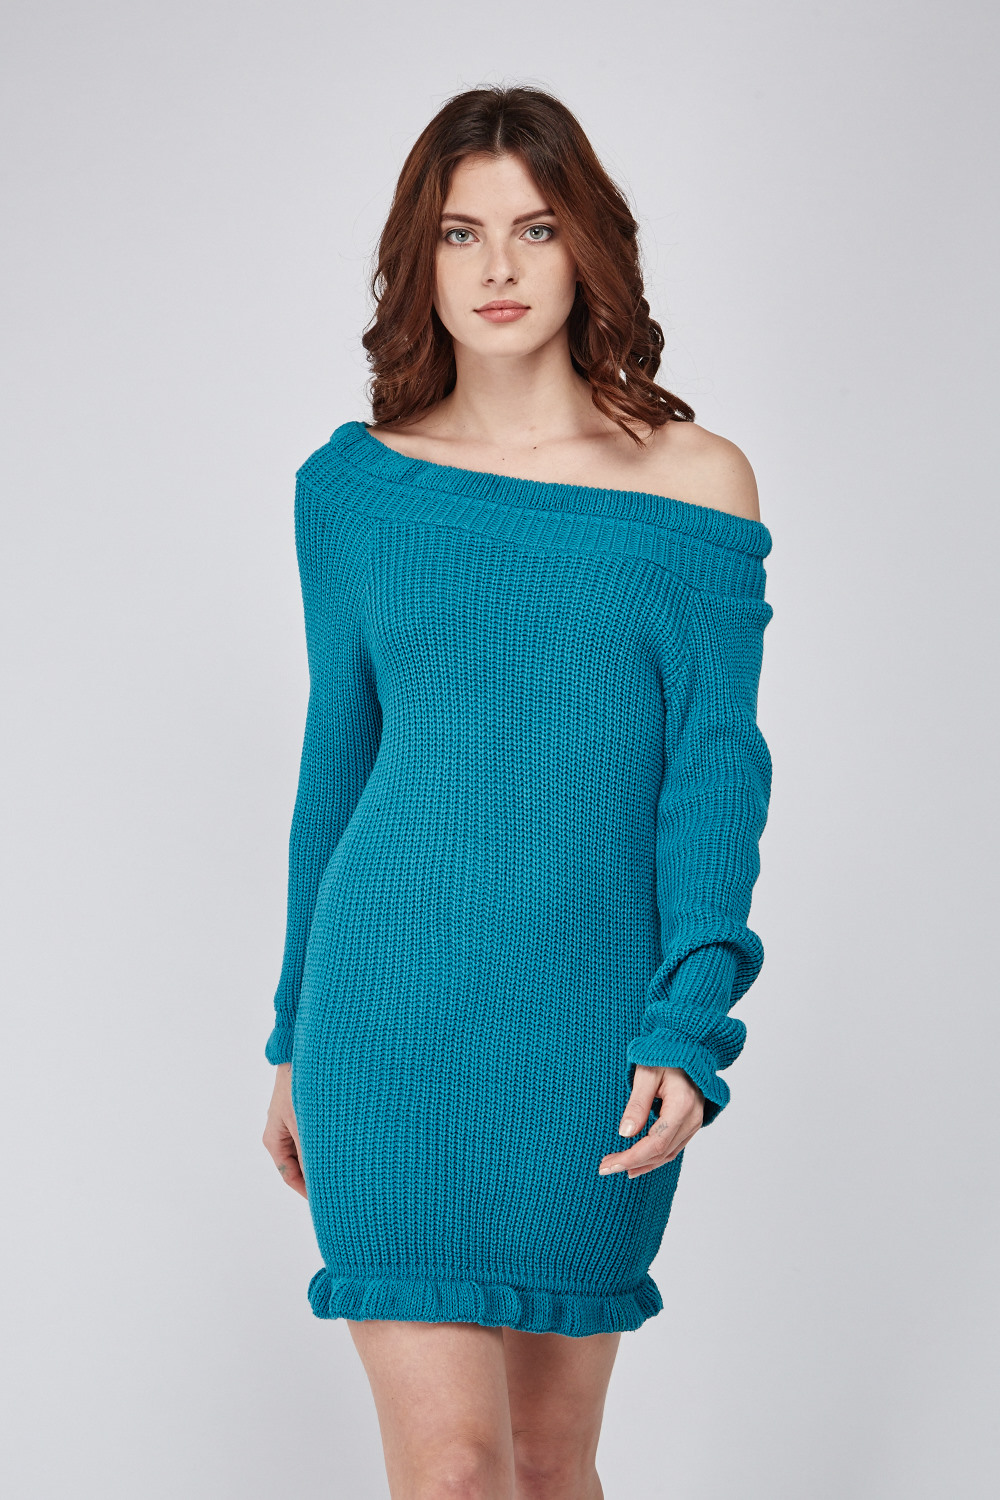 Ruched Trim Knitted Dress Just 7